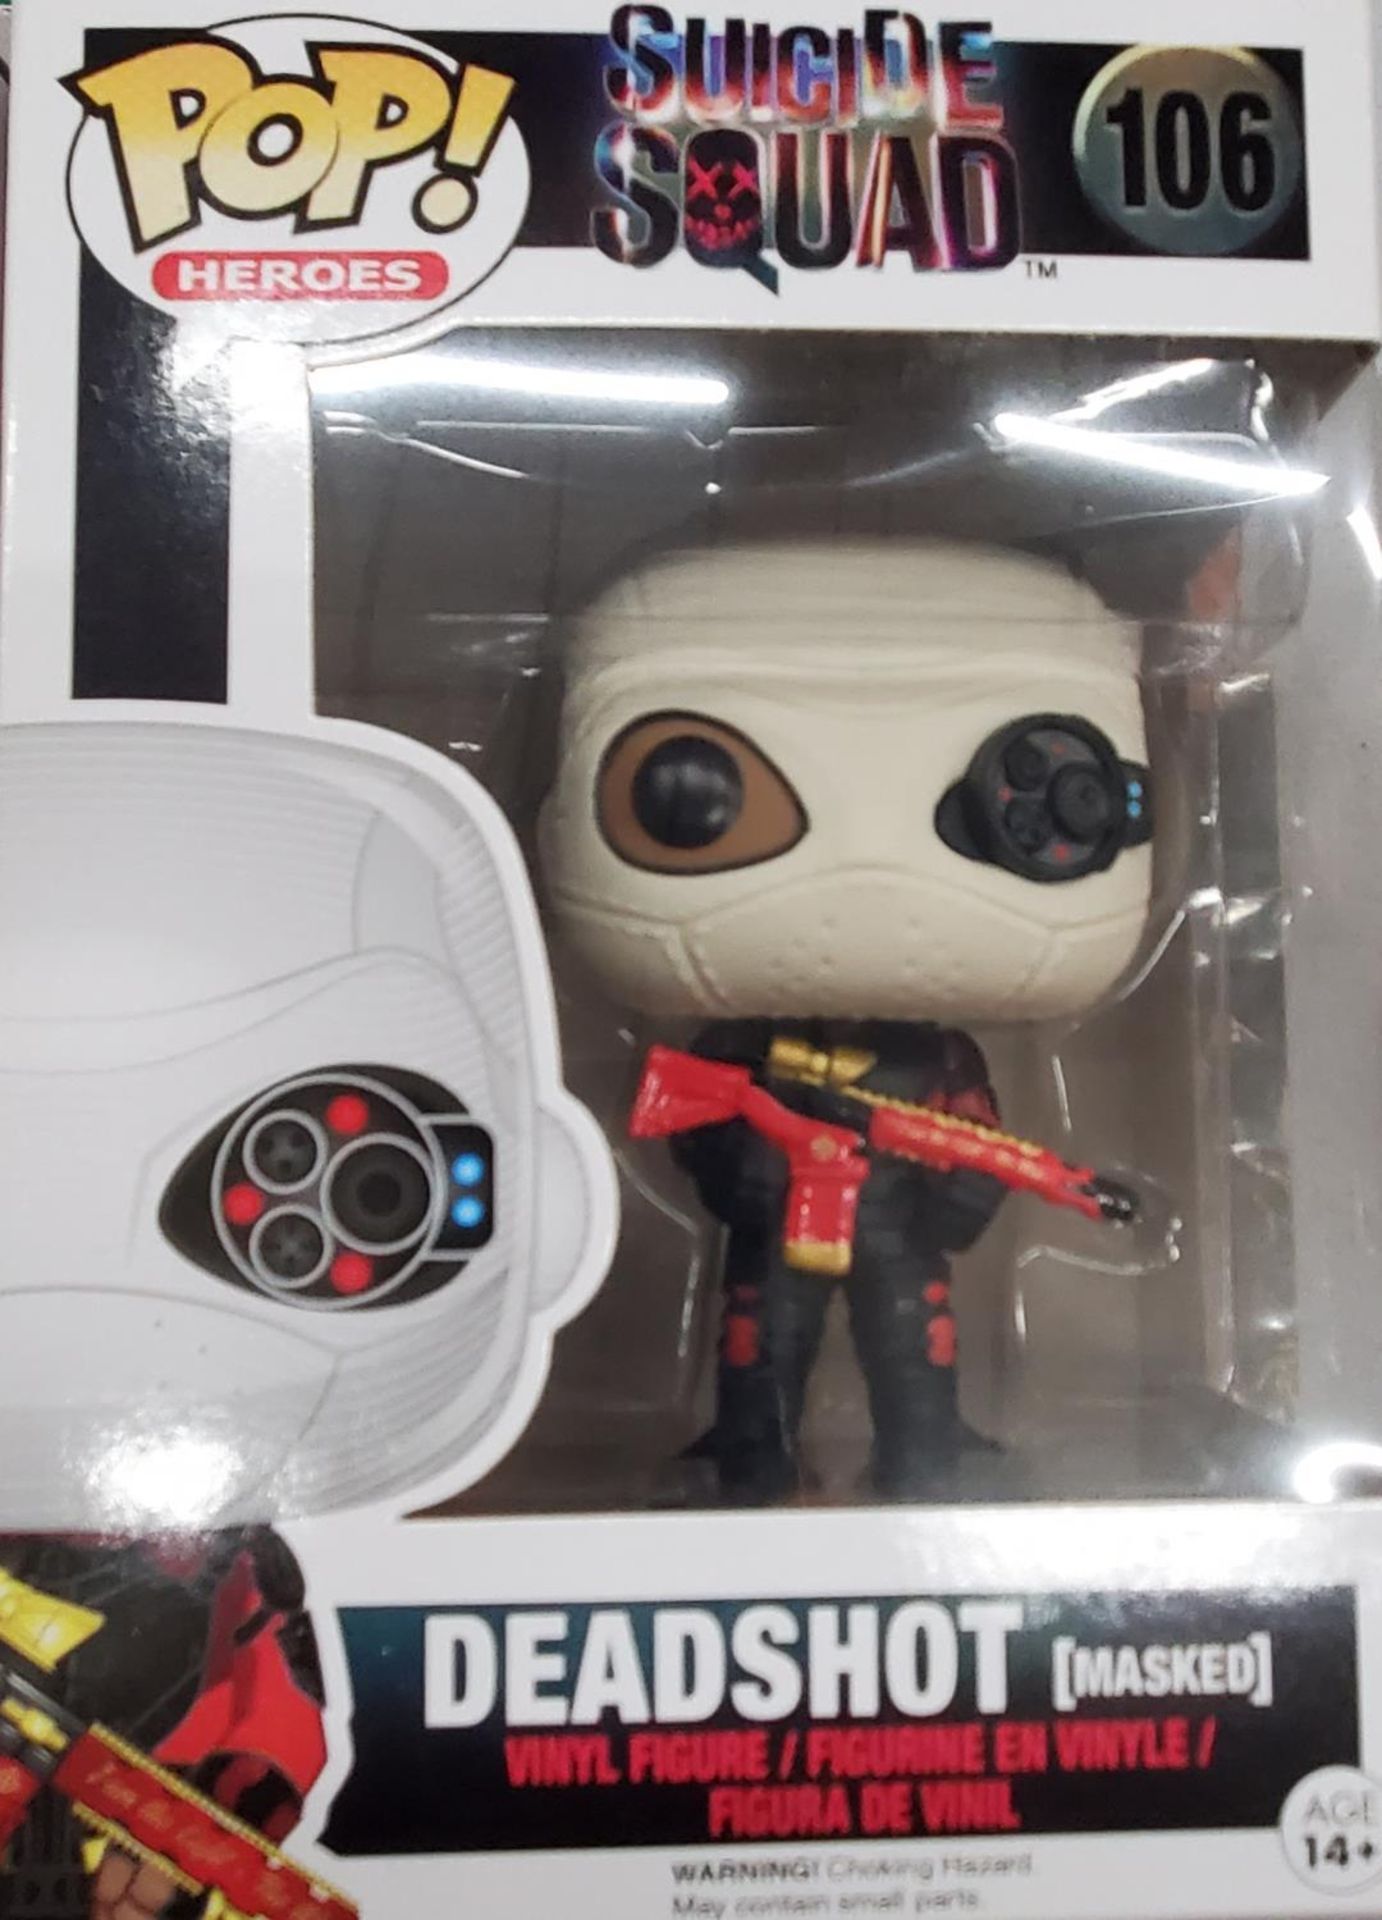 TWO FUNKO POP VINYL FIGURES TO INCLUDE 'HIRO HAMADA' AND 'DEADSHOT SUICIDE SQUAD' - AS NEW IN - Image 3 of 3